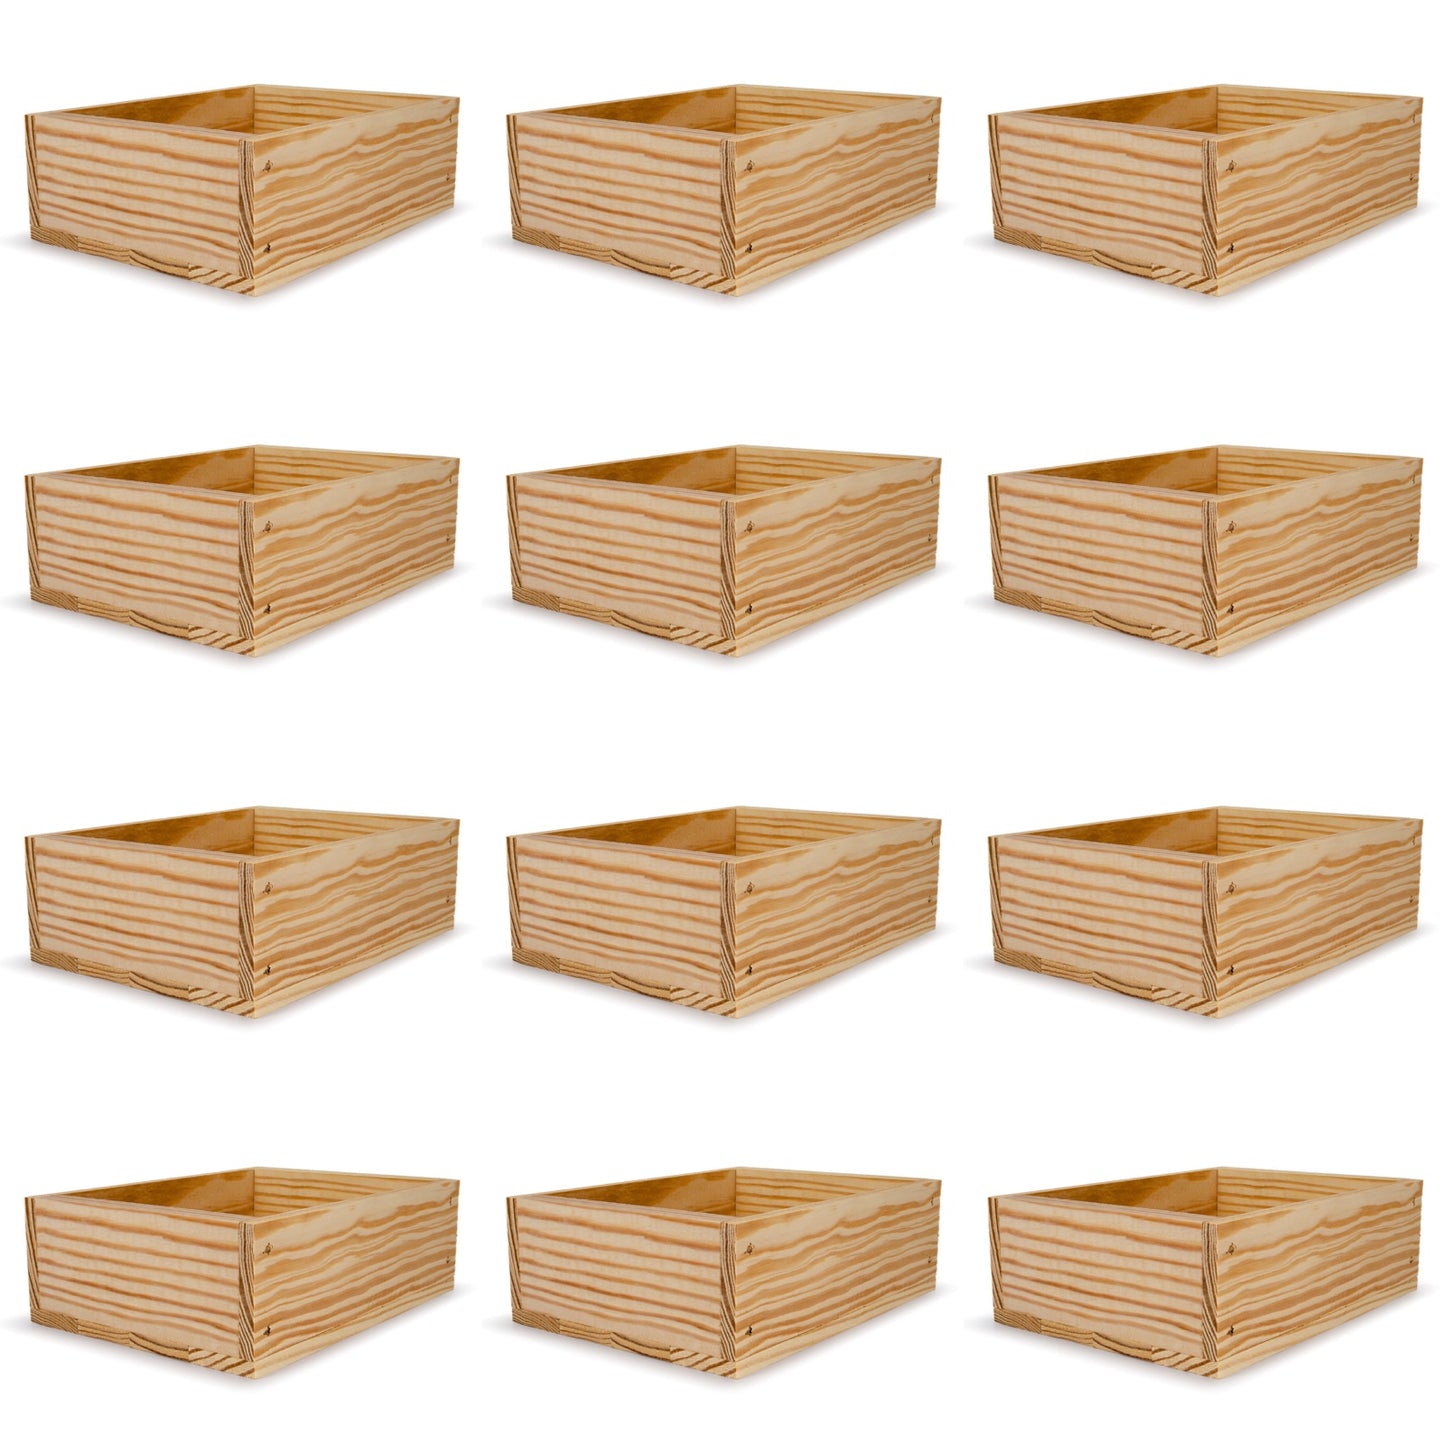 12 Small wooden crates 8x6.25x2.75